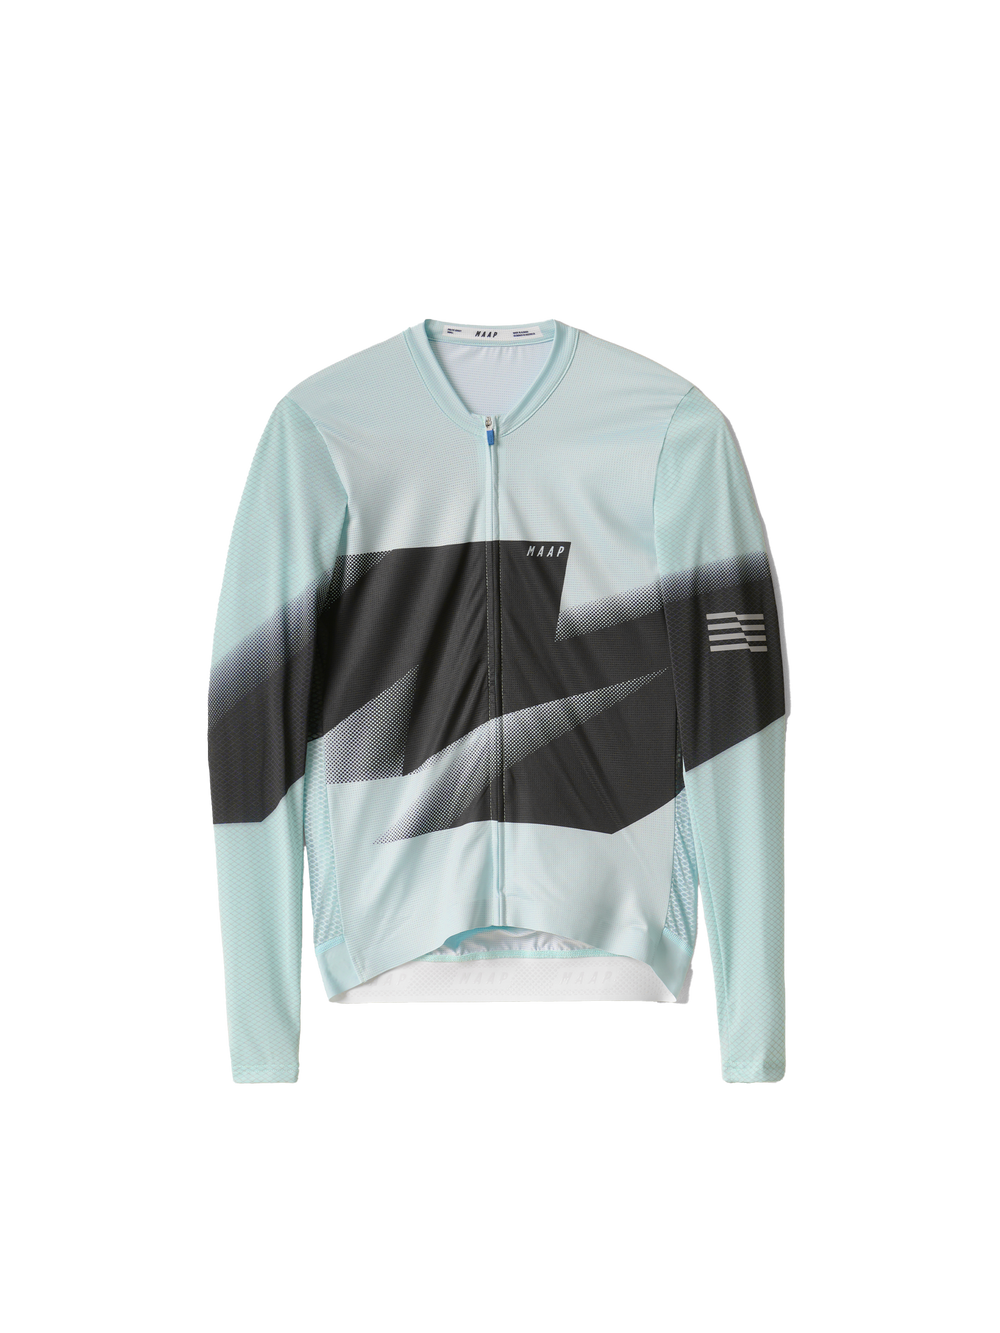 Product Image for Evolve Pro Air LS Jersey 2.0